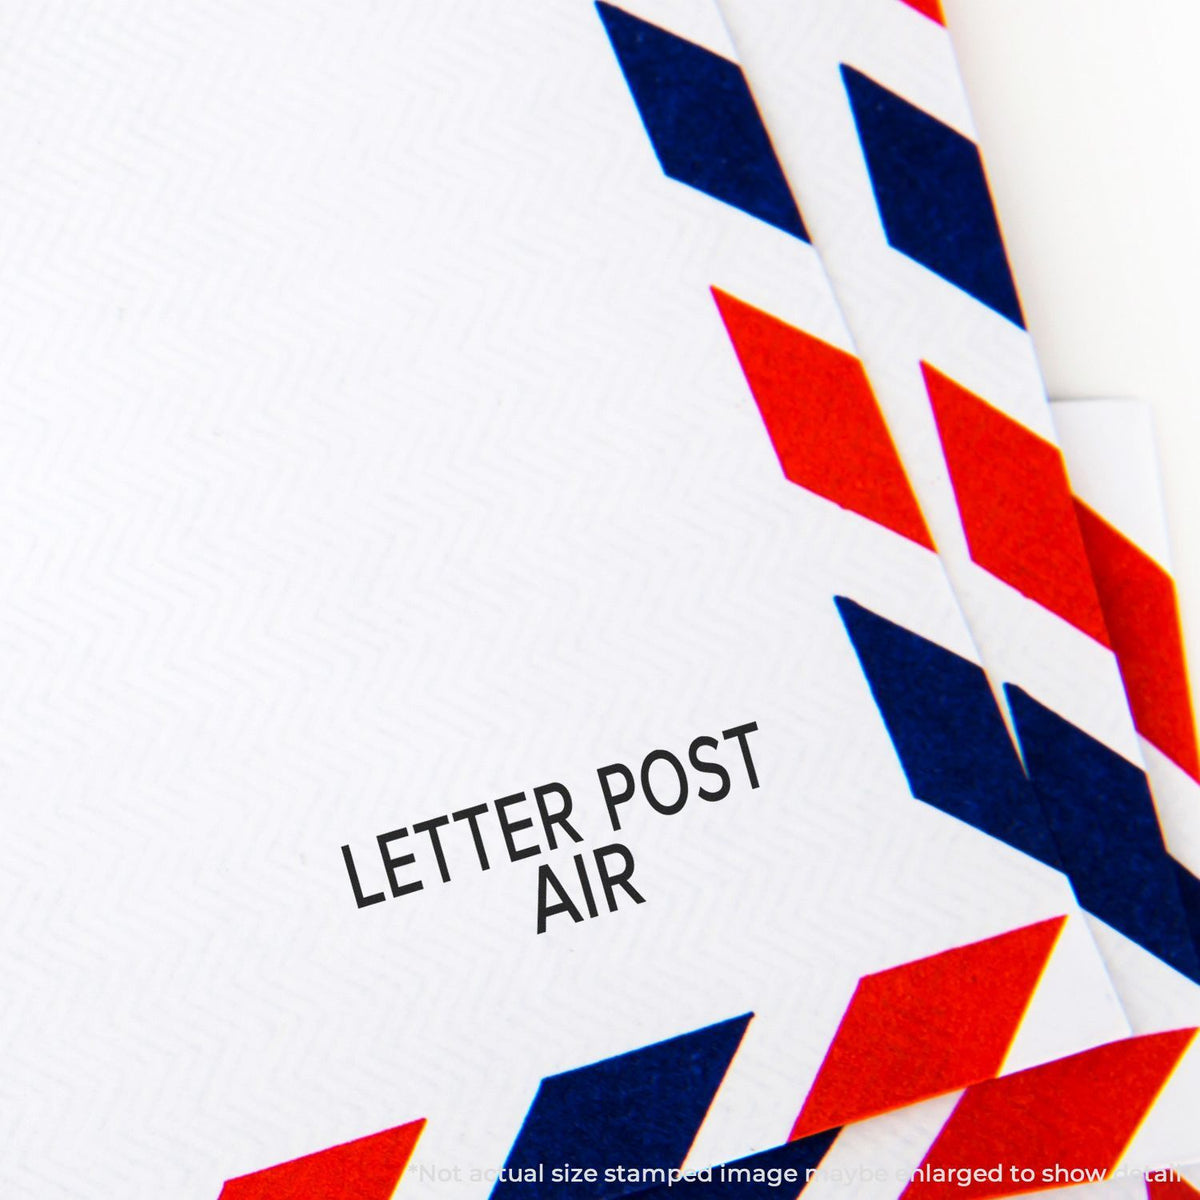 In Use Self-Inking Letter Post Air Stamp Image